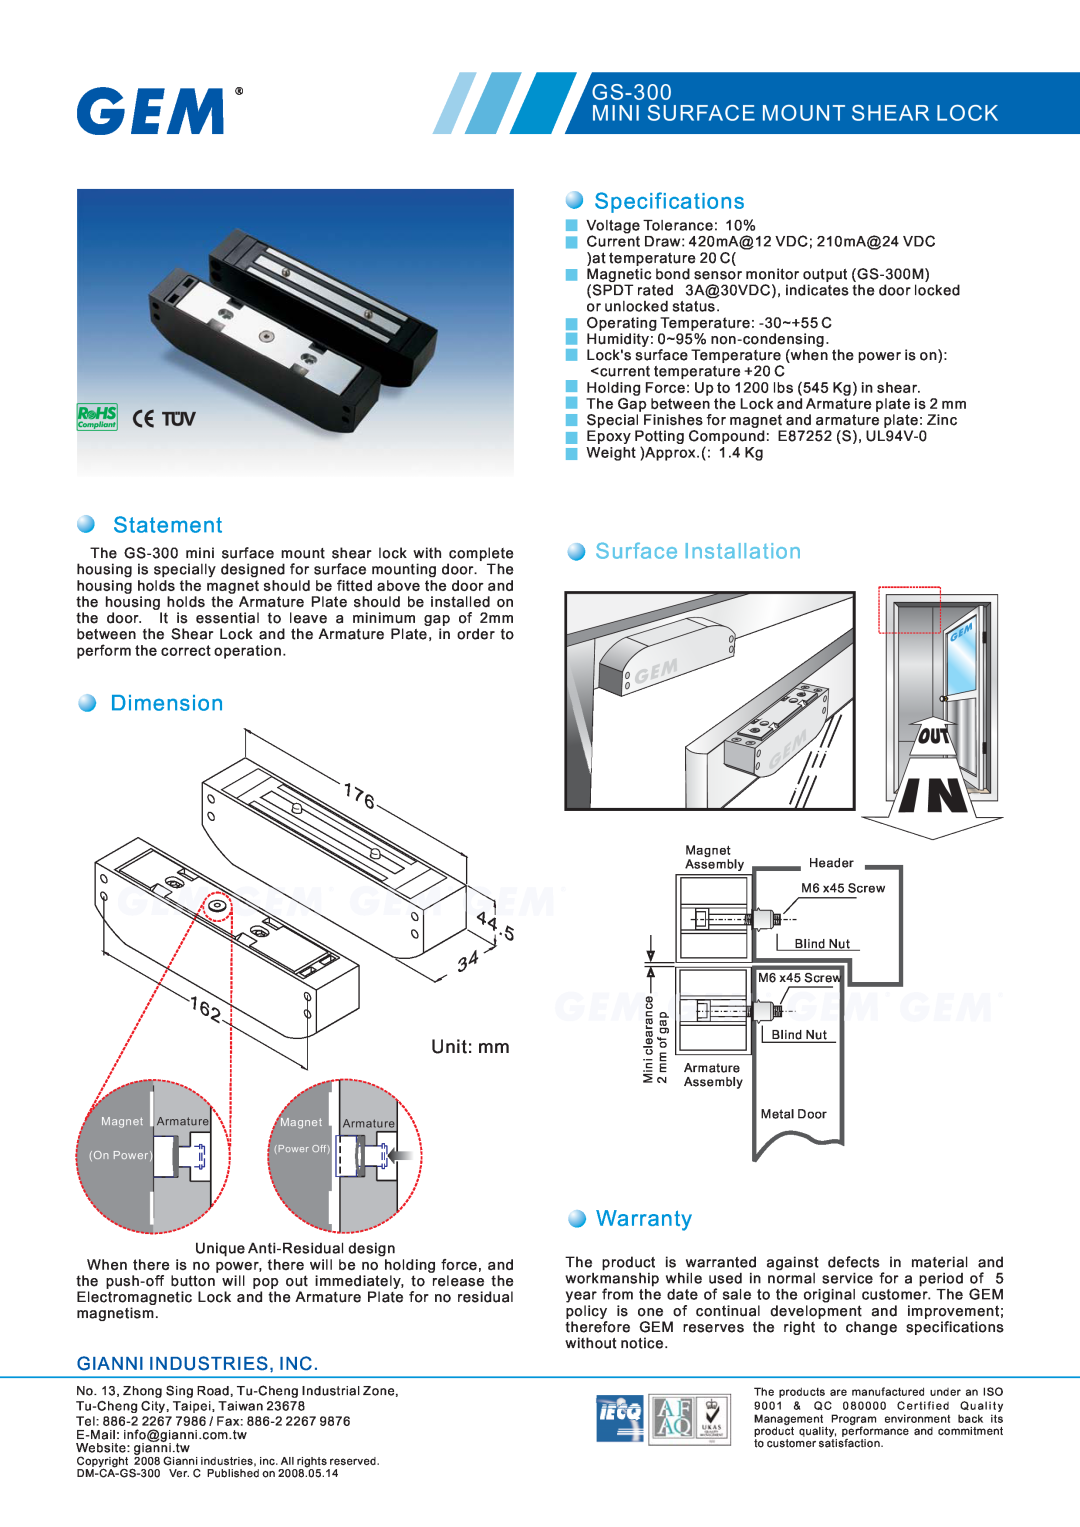 Gianni Industries specifications Statement, Dimension, GS-300 MINI SURFACE MOUNT SHEAR LOCK, Specifications, Warranty 